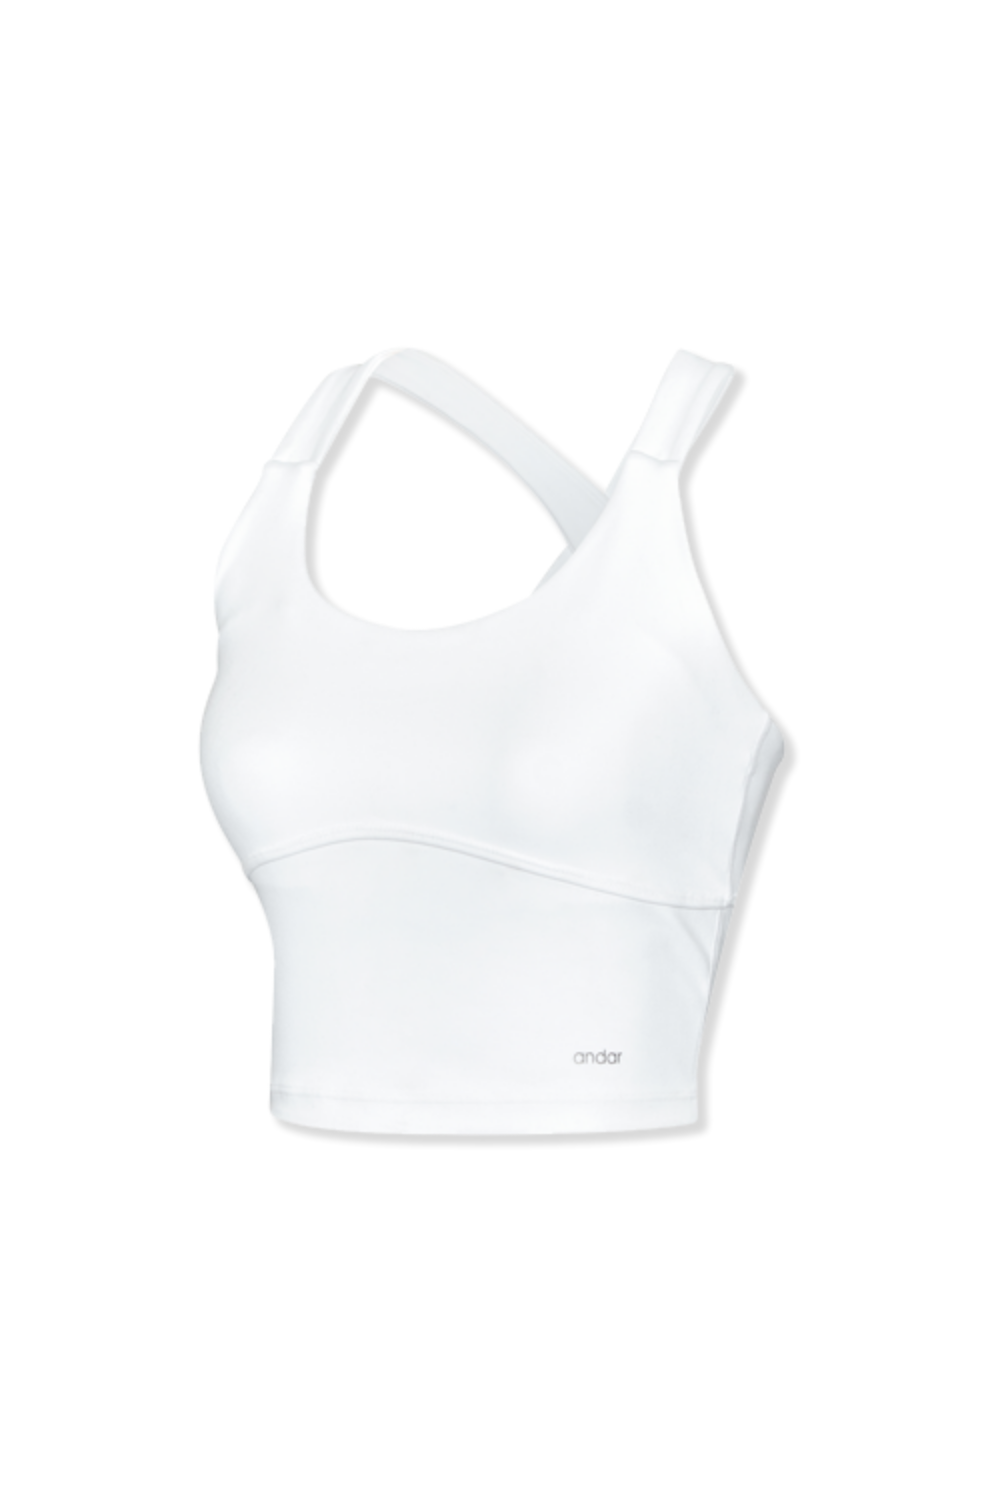 Aircooling Glam Crop Top , C/D cups